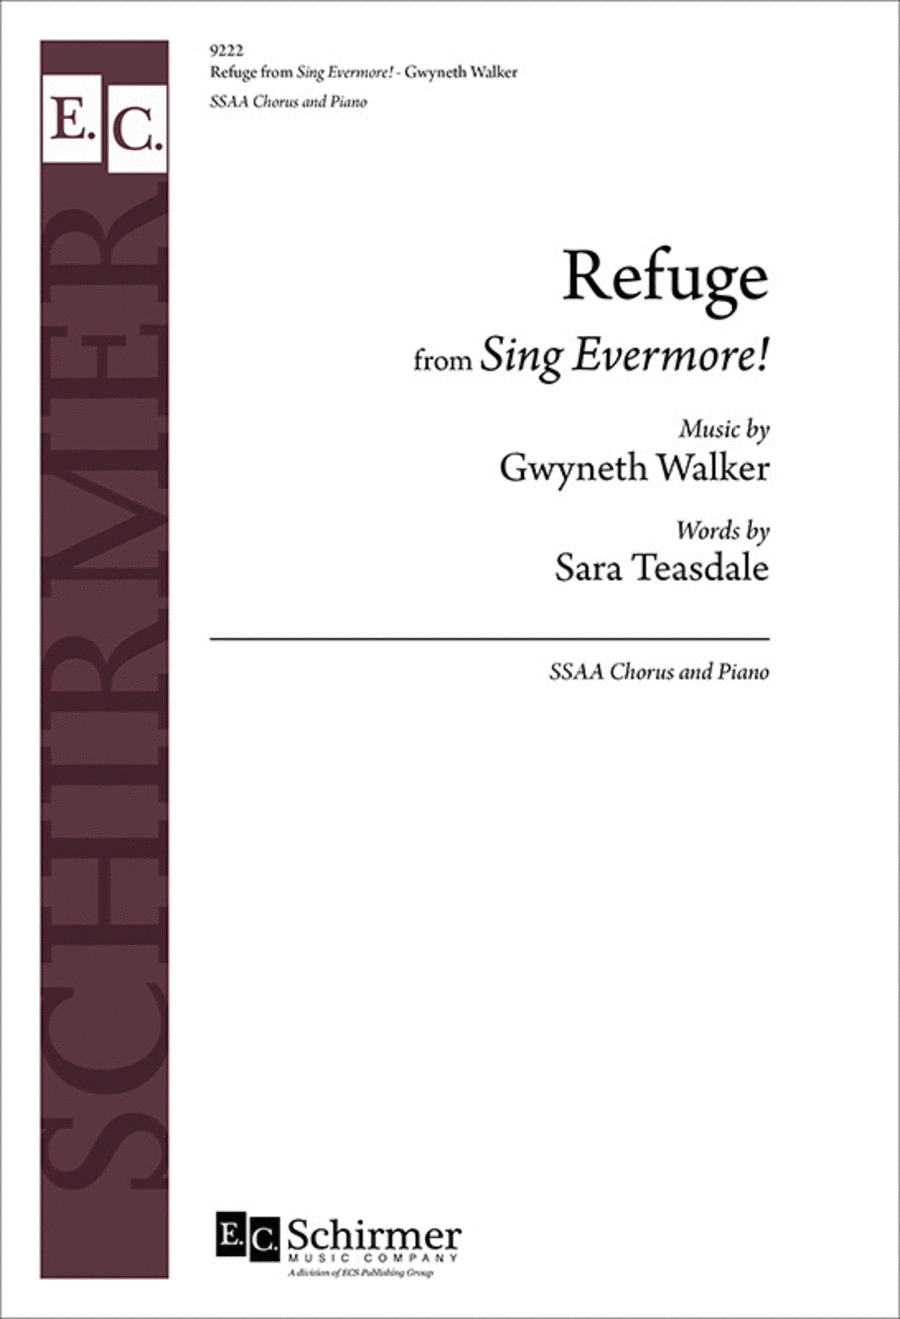 Refuge from Sing Evermore!